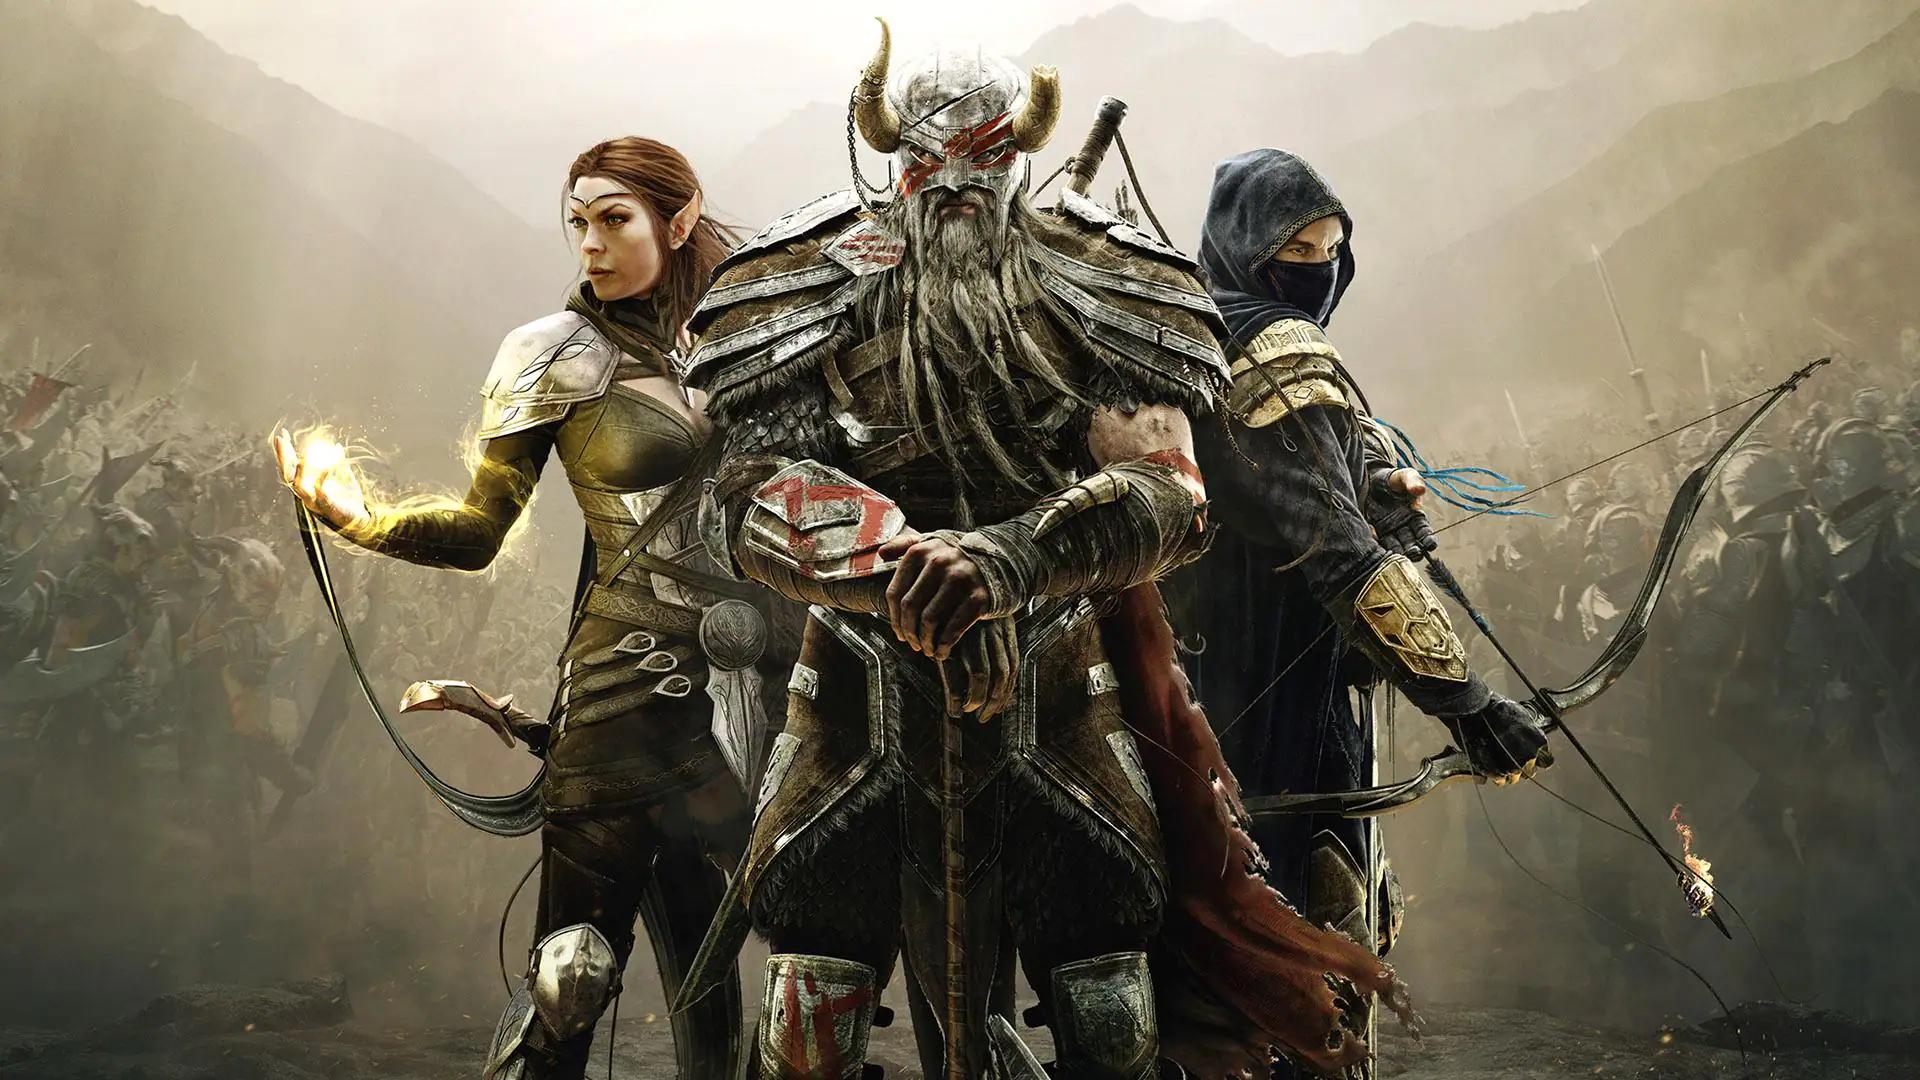 The Next Elder Scrolls Game: Release Date and Exclusivity Updates